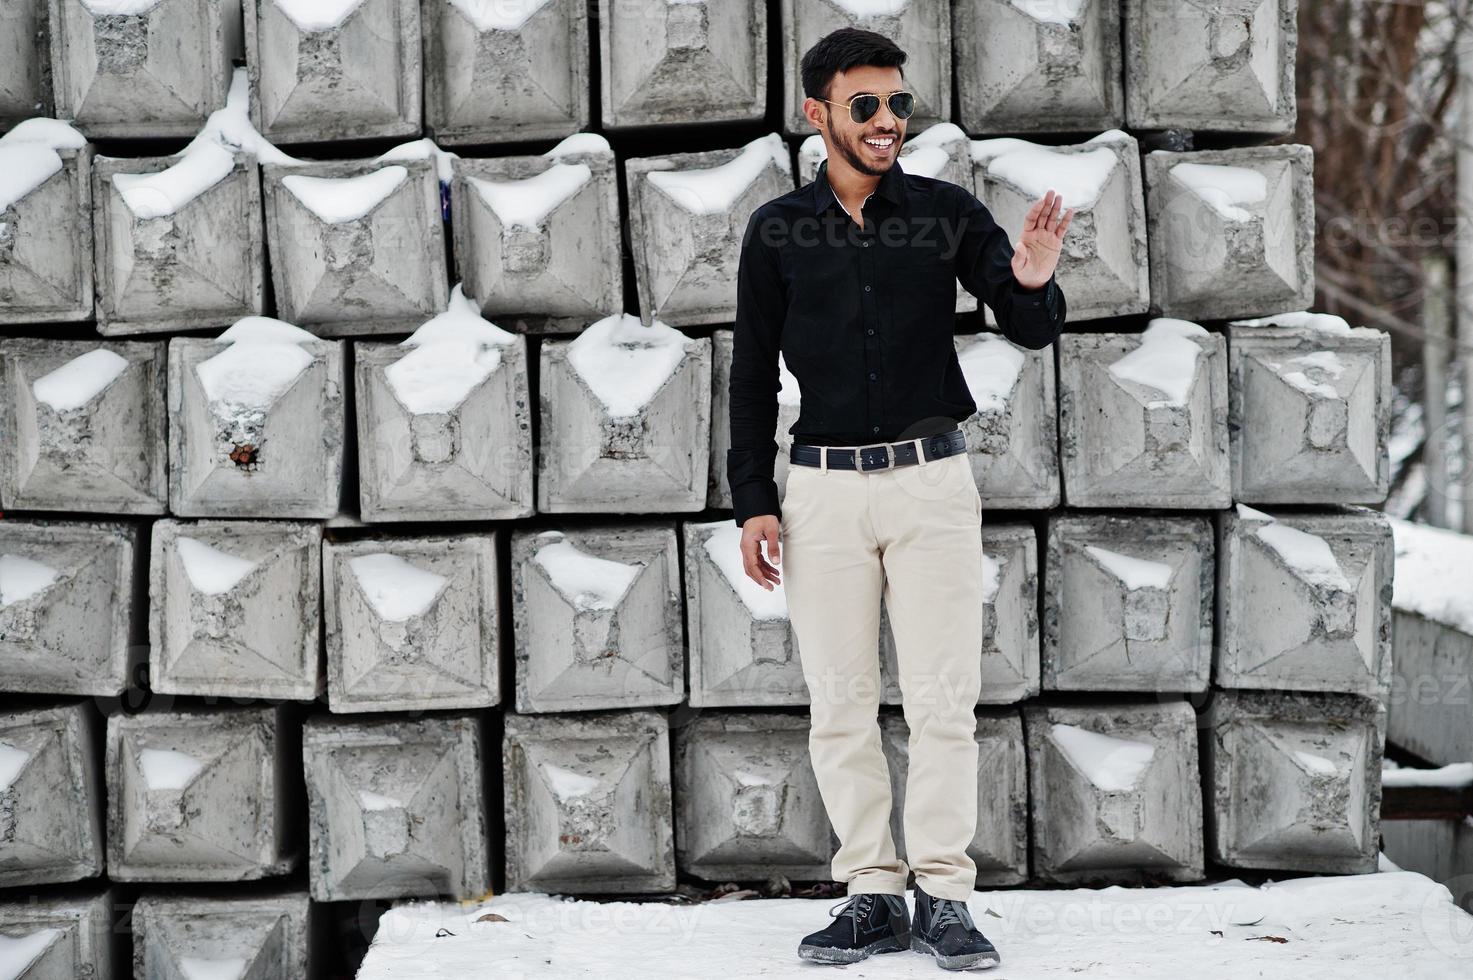 Casual young indian man in black shirt and sunglasses posed against stone blocks. photo